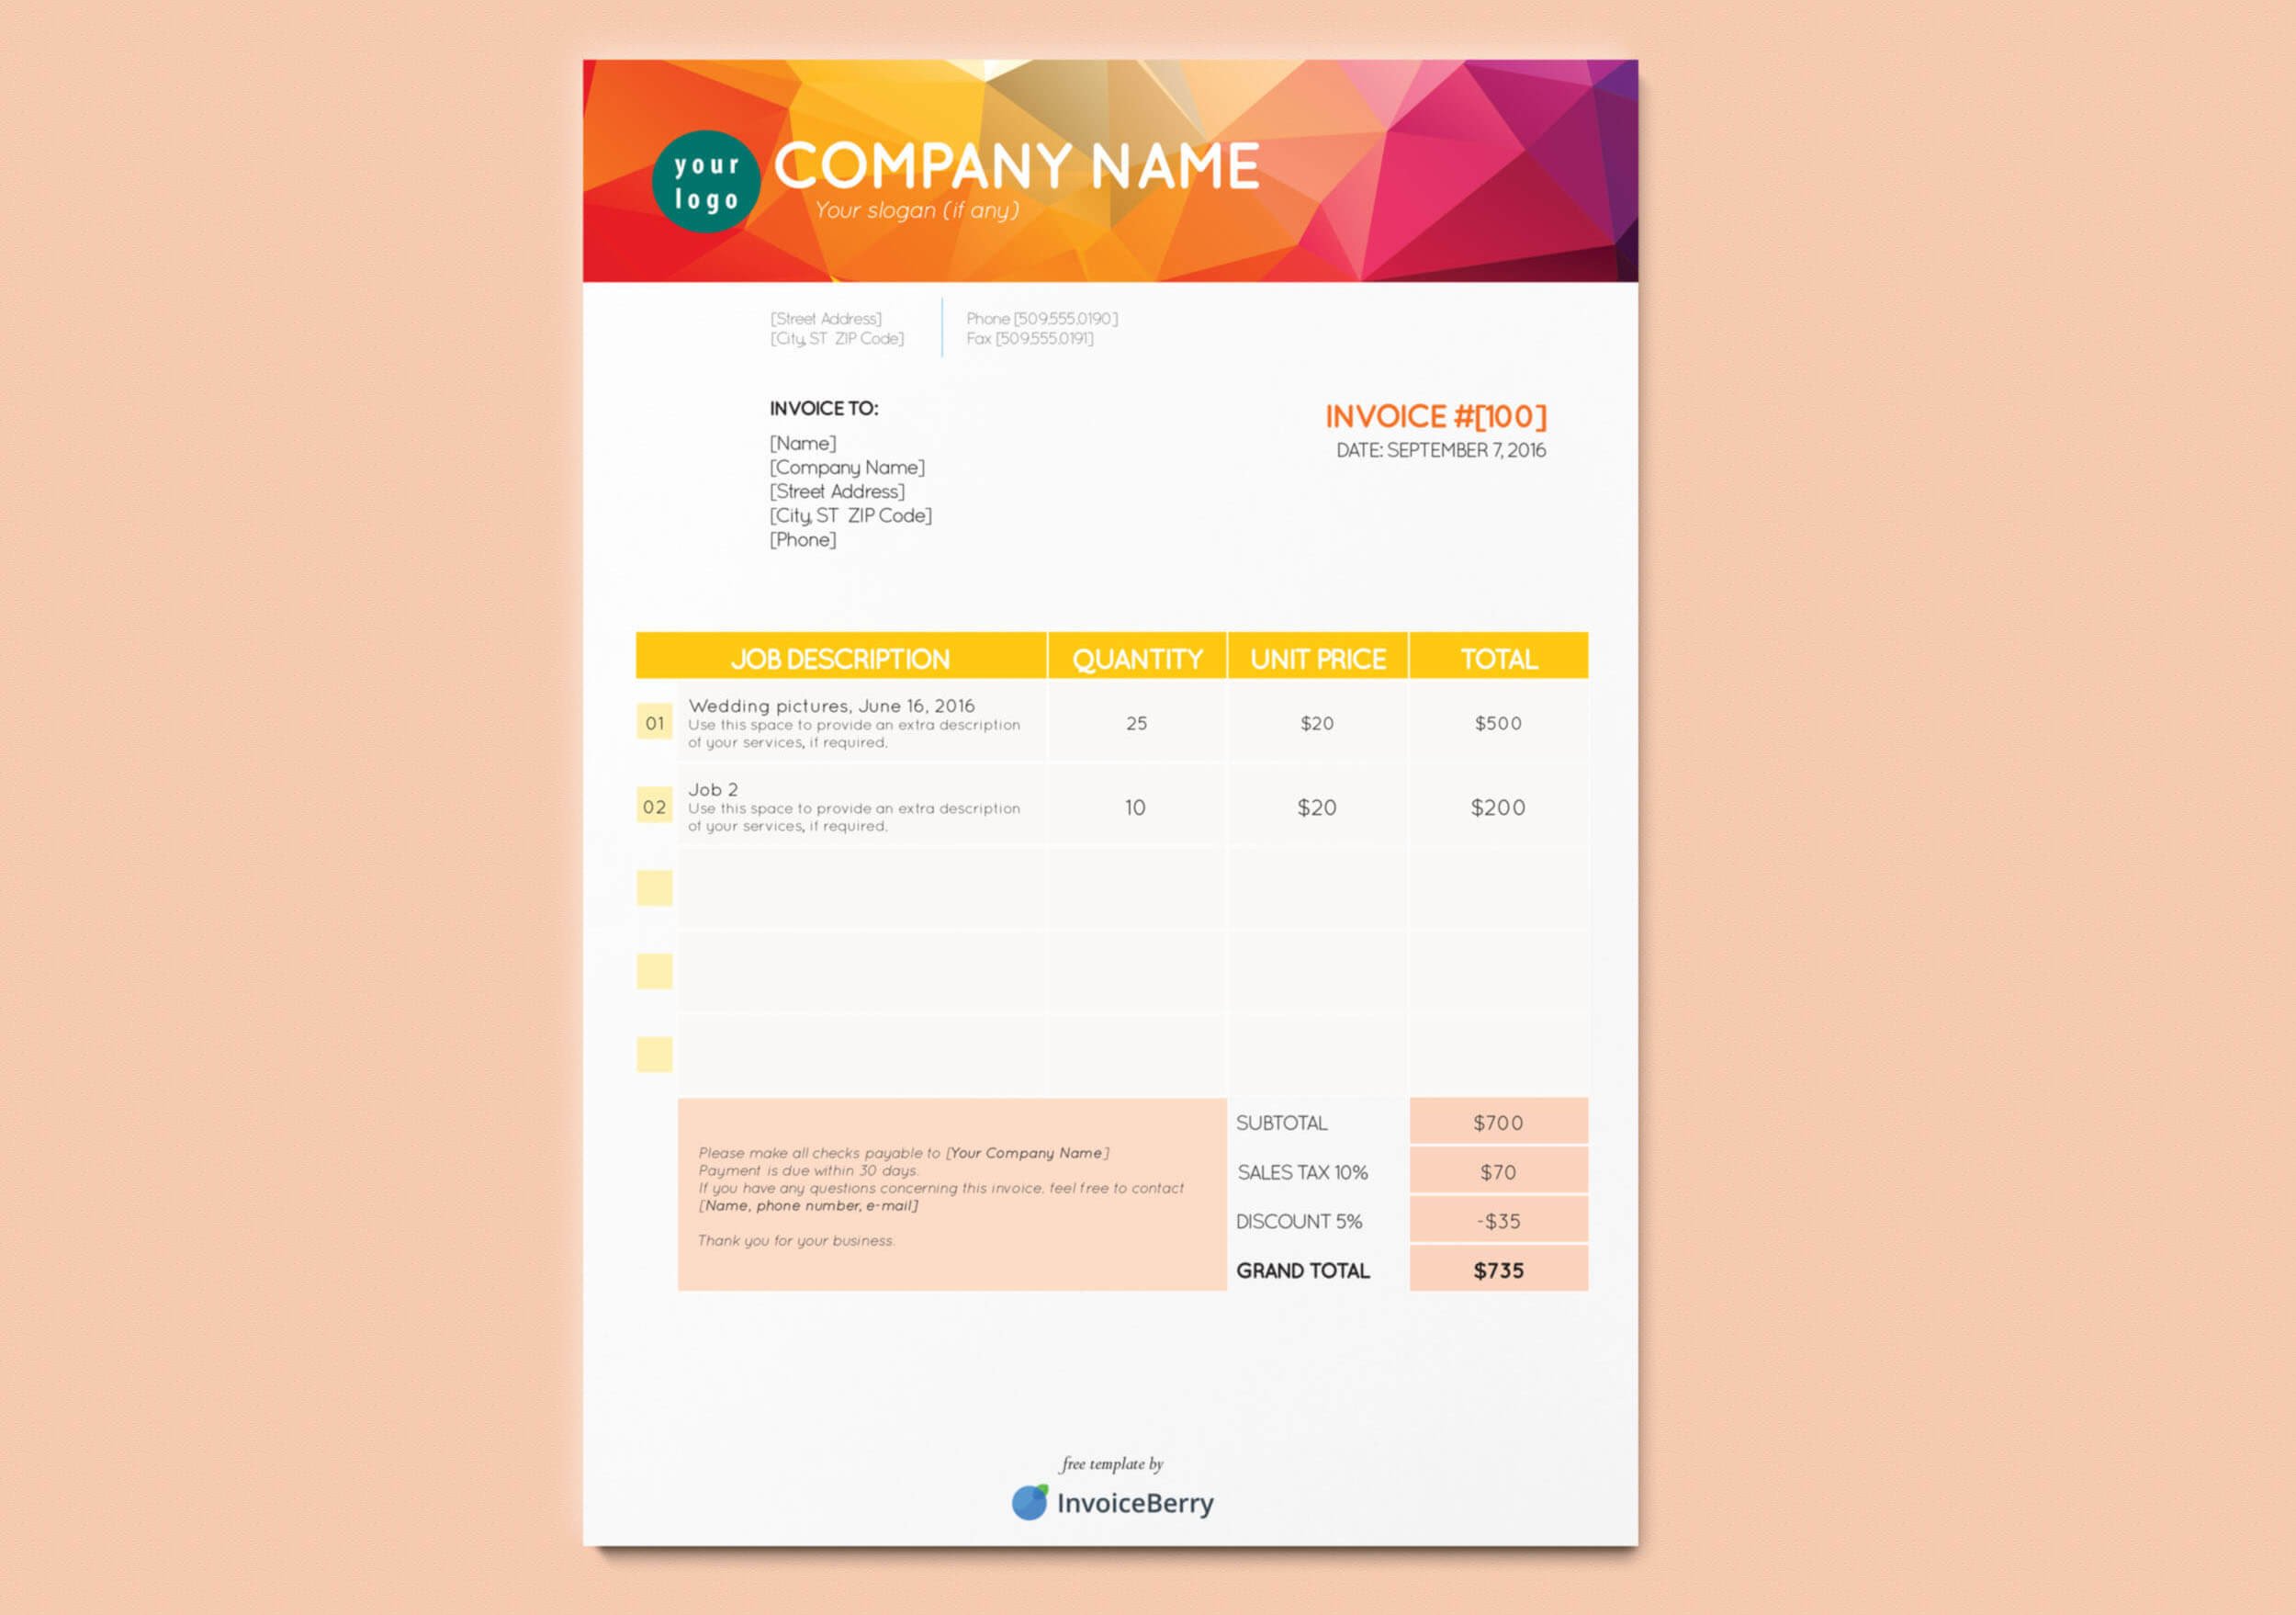 Free New InDesign Invoice Templates